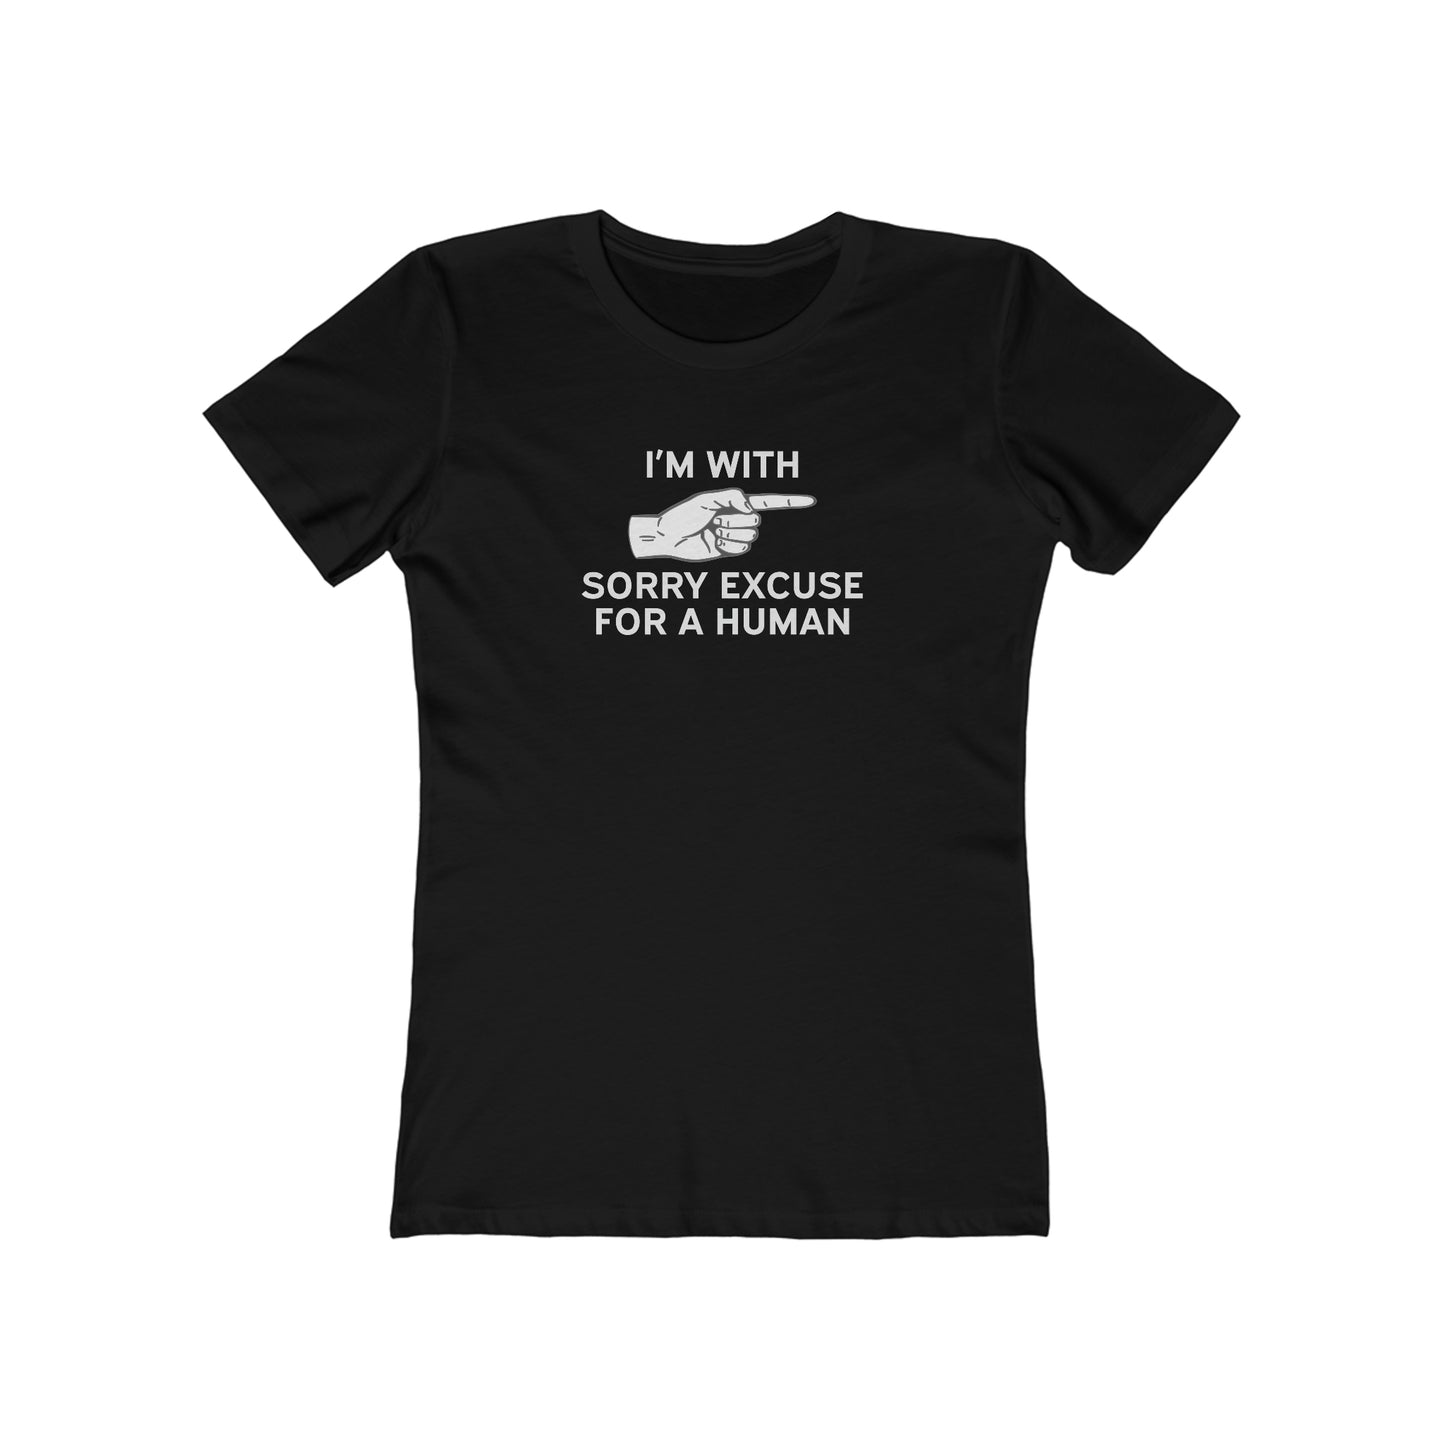 I'm With Sorry Excuse for a Human - Women's T-Shirt